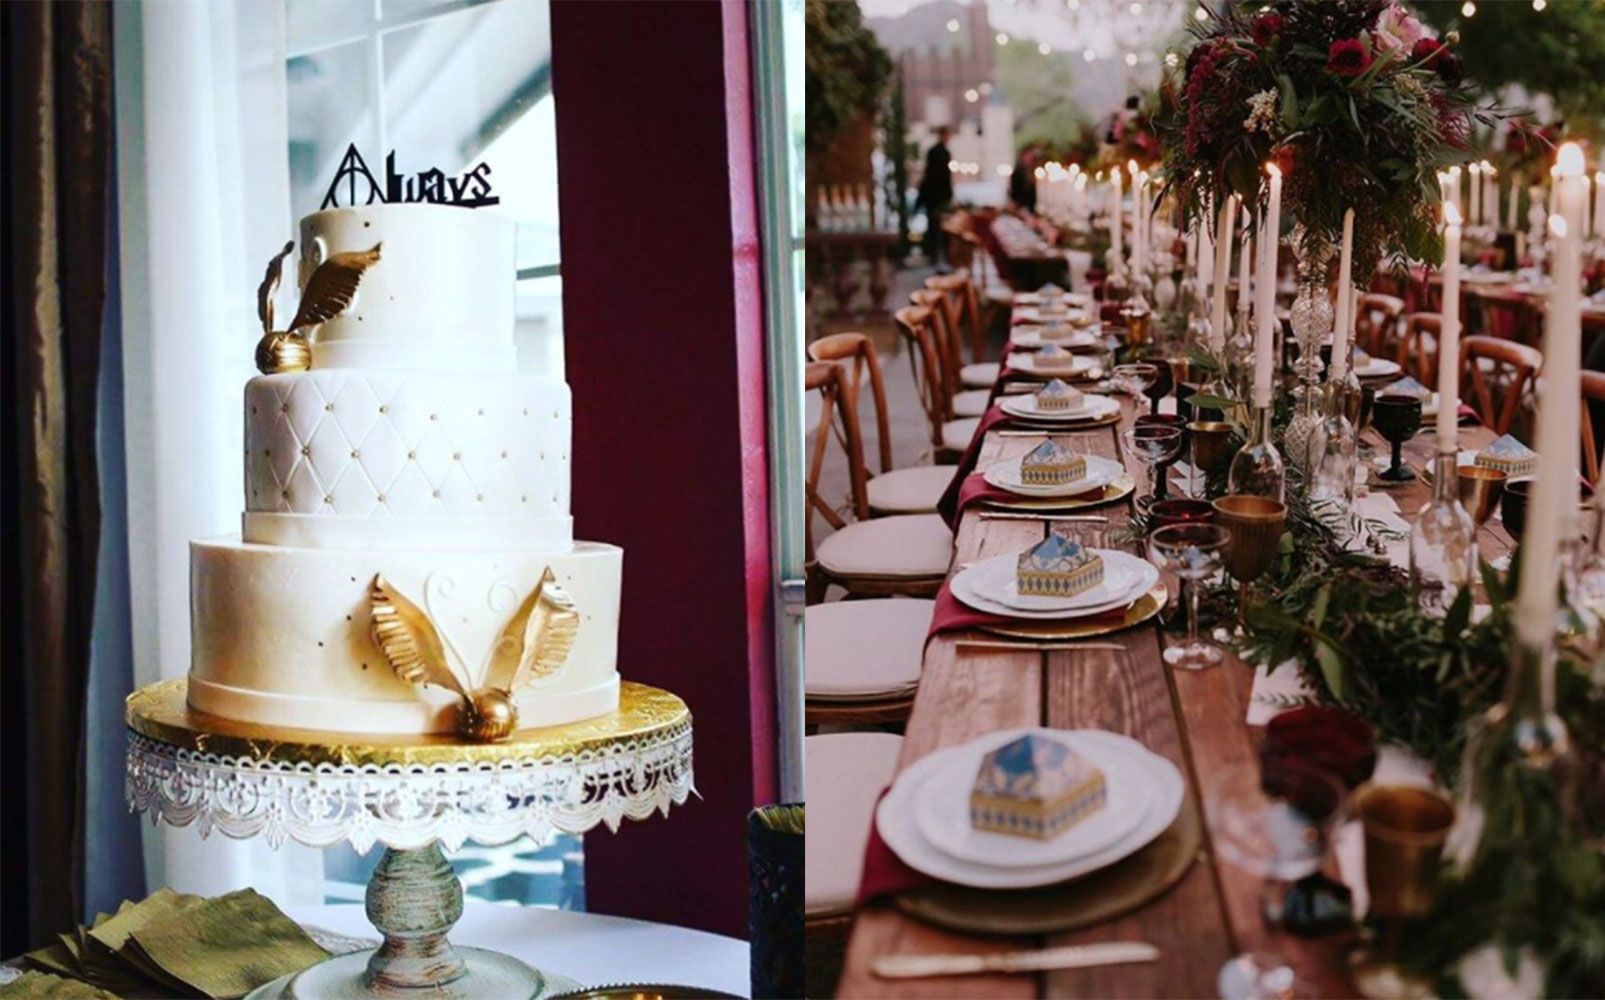 These Harry Potter-Themed Weddings Will Make Any Muggle Jealous